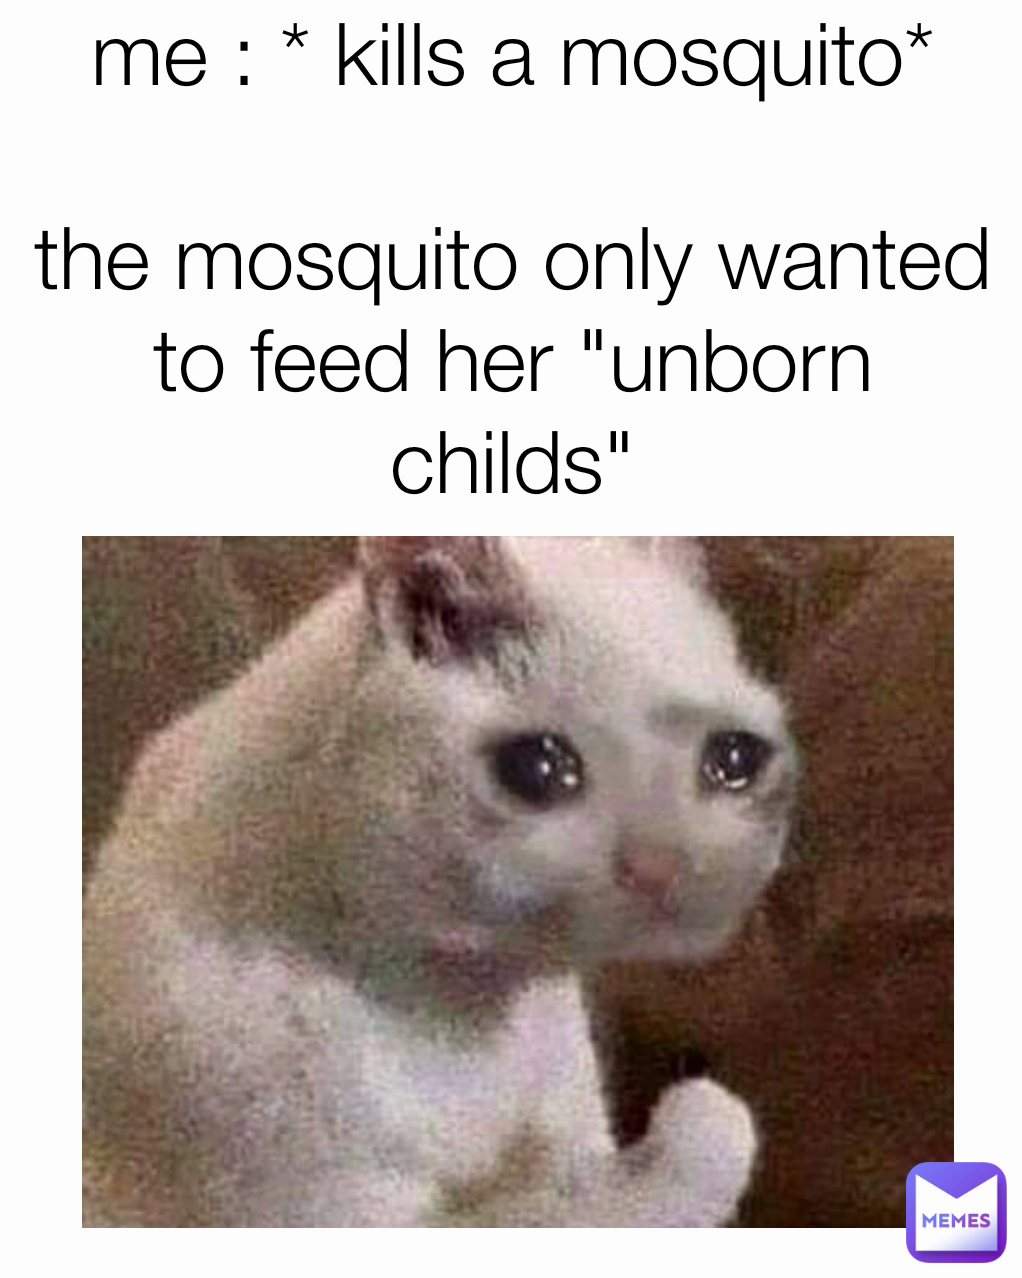 me : * kills a mosquito*

the mosquito only wanted to feed her "unborn childs"